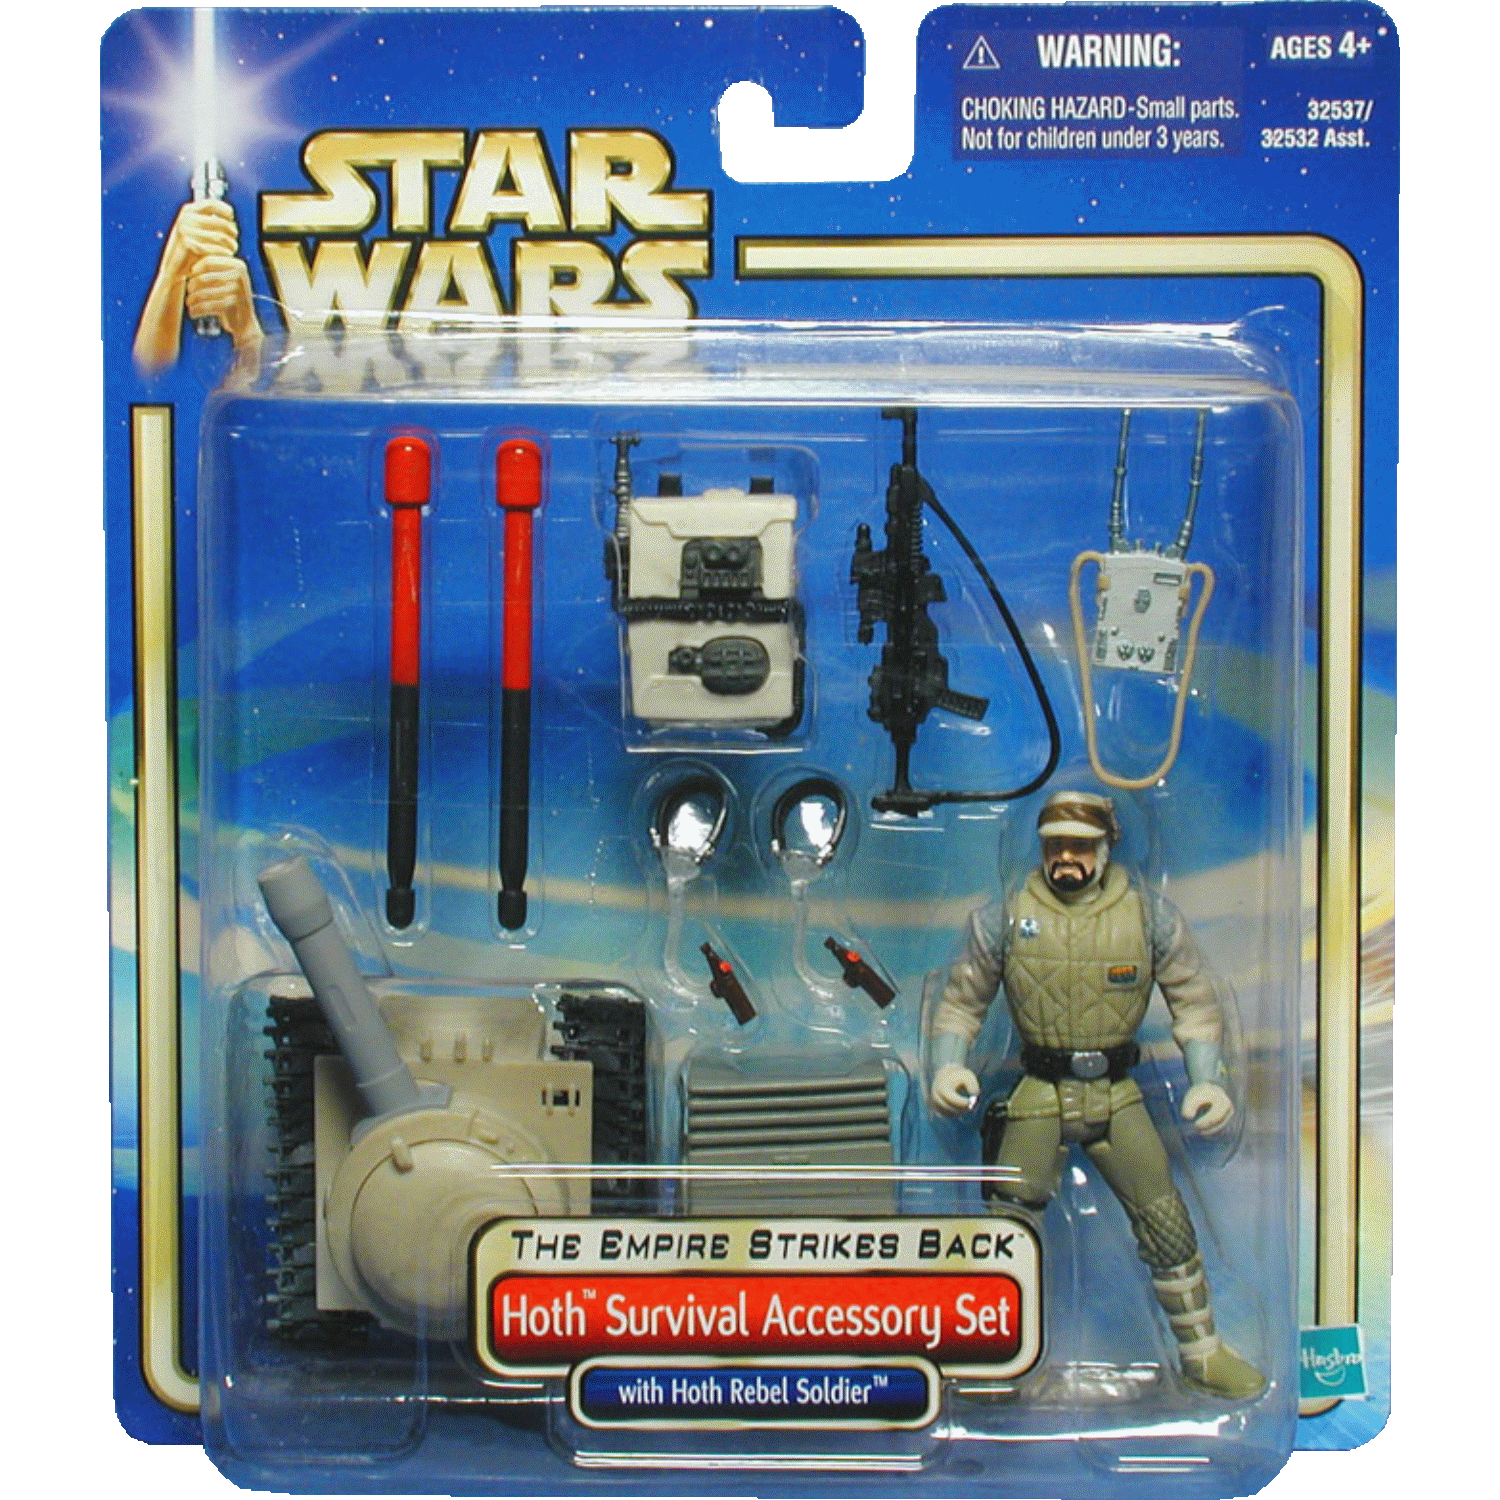 Star Wars Saga The Empire Strikes Back Hoth Survival Accessory Set With Hoth Rebel Soldier Hasbro